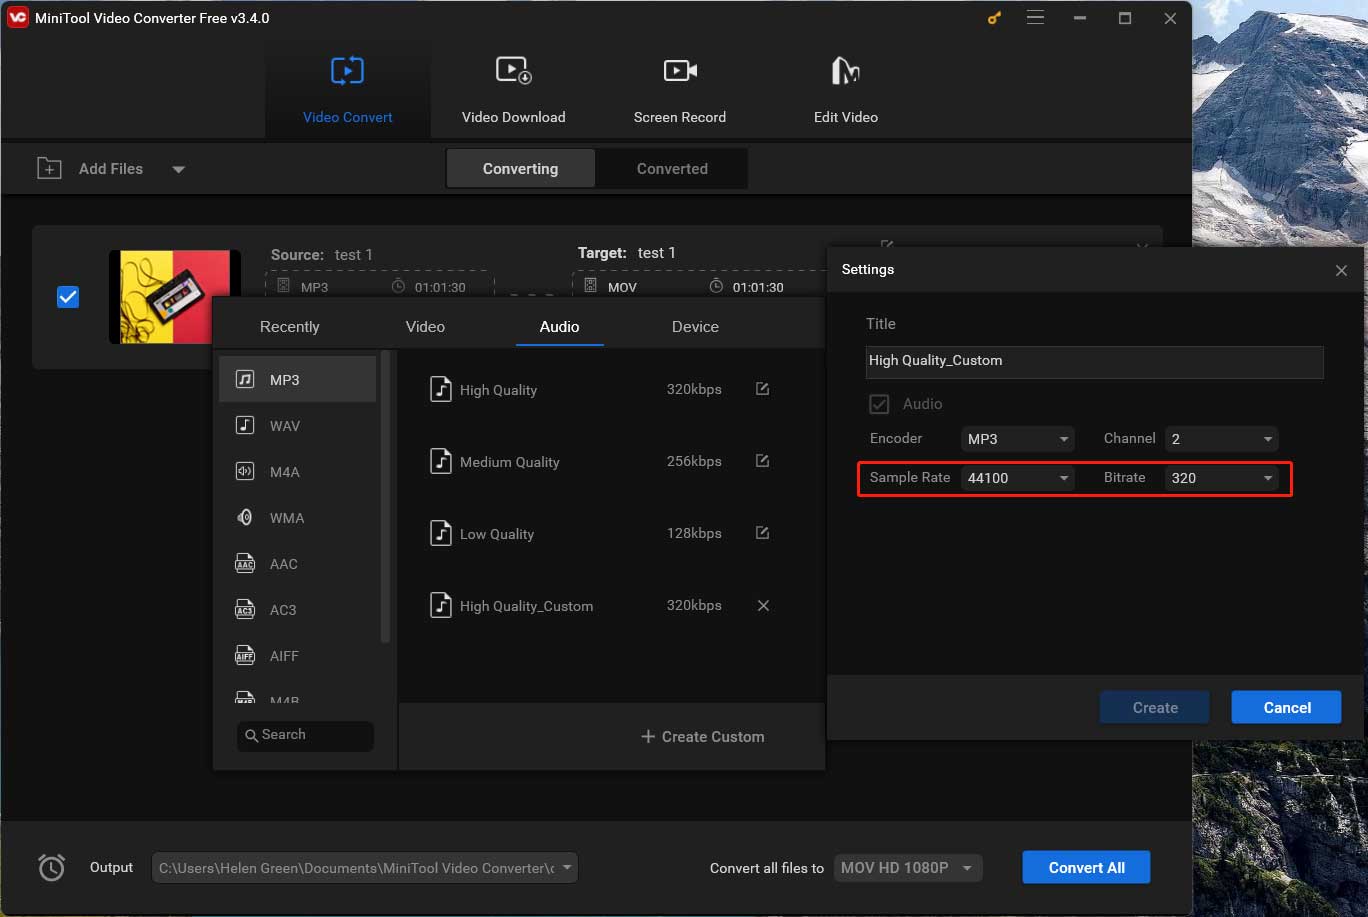 MiniTool Video Converter changes audio sample rate and bitrate